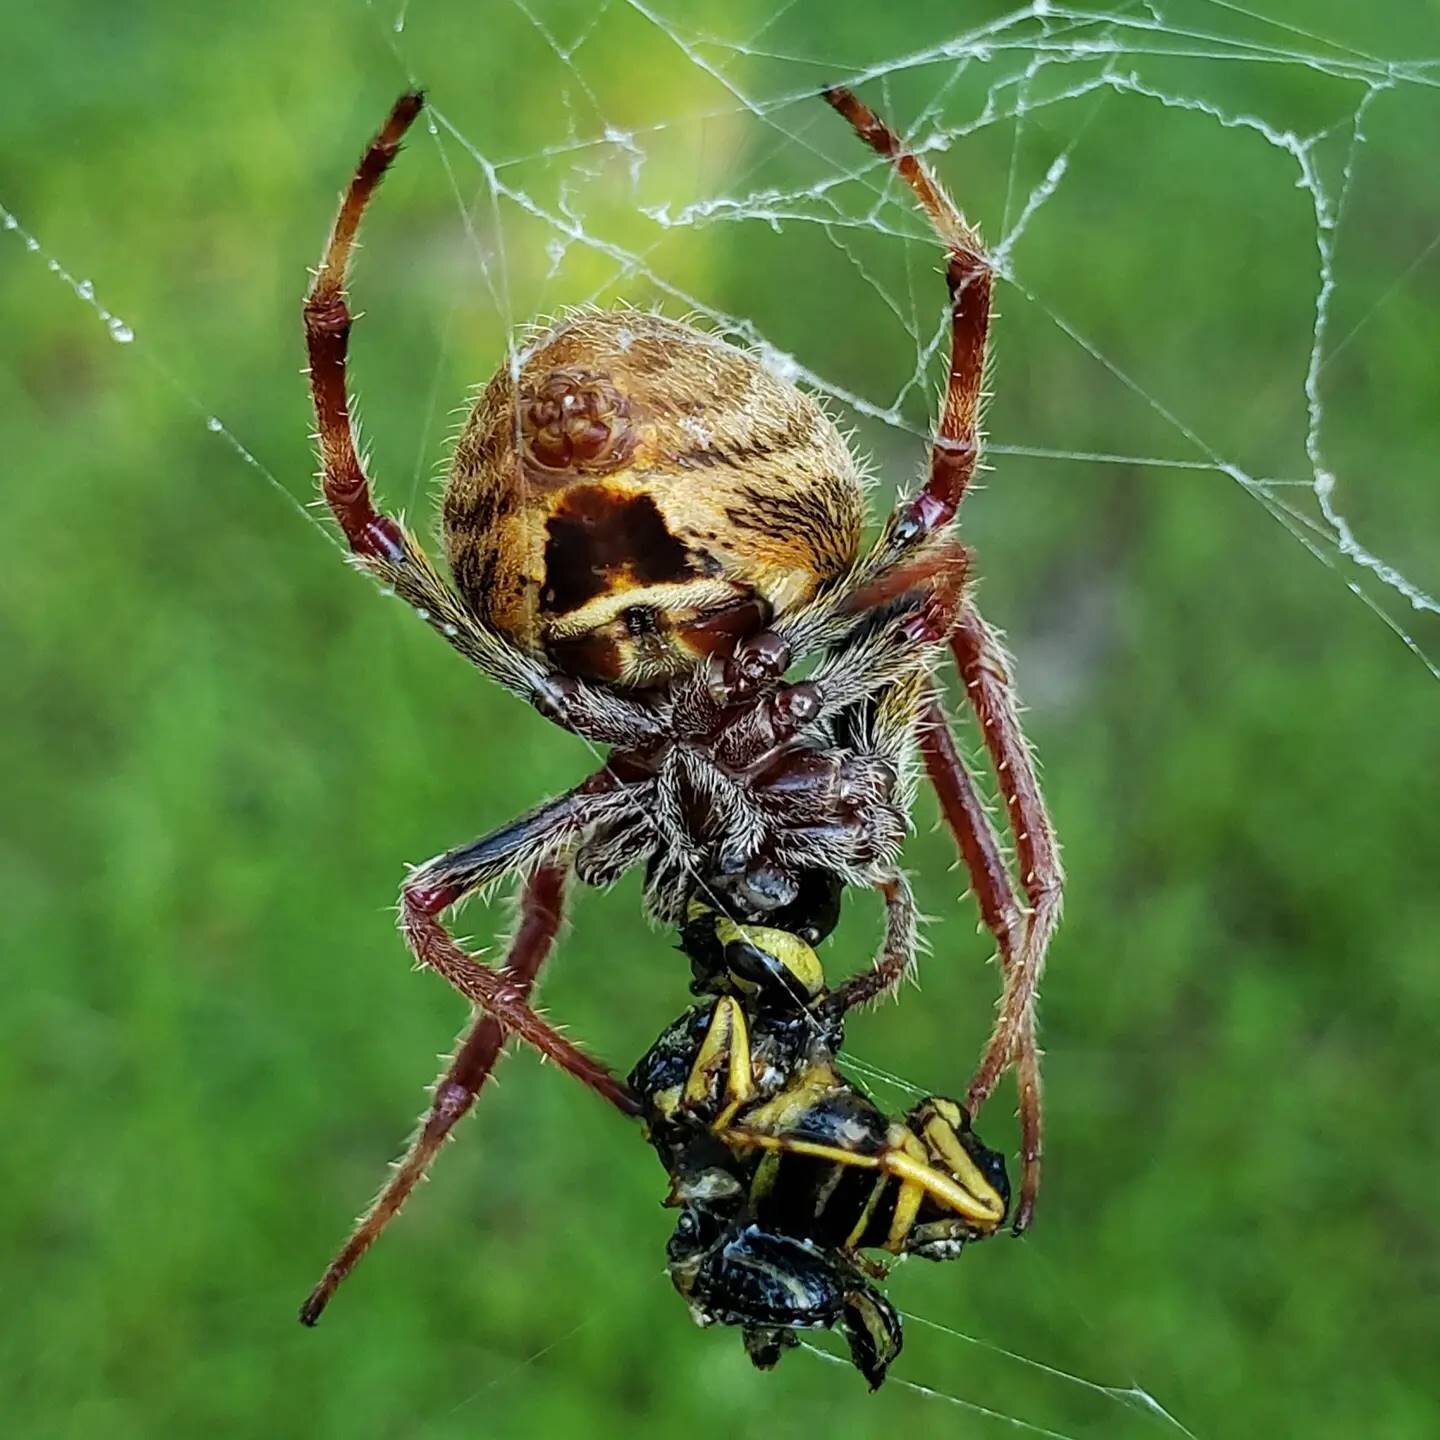 Usually our mornings are all about goats, hens, wild birds and the rising sun. Today we stopped to watch this Tropical Orb Weaver make breakfast from a yellow jacket. #nature #spider #tropicalorbweaver #TwoGroomsFarm